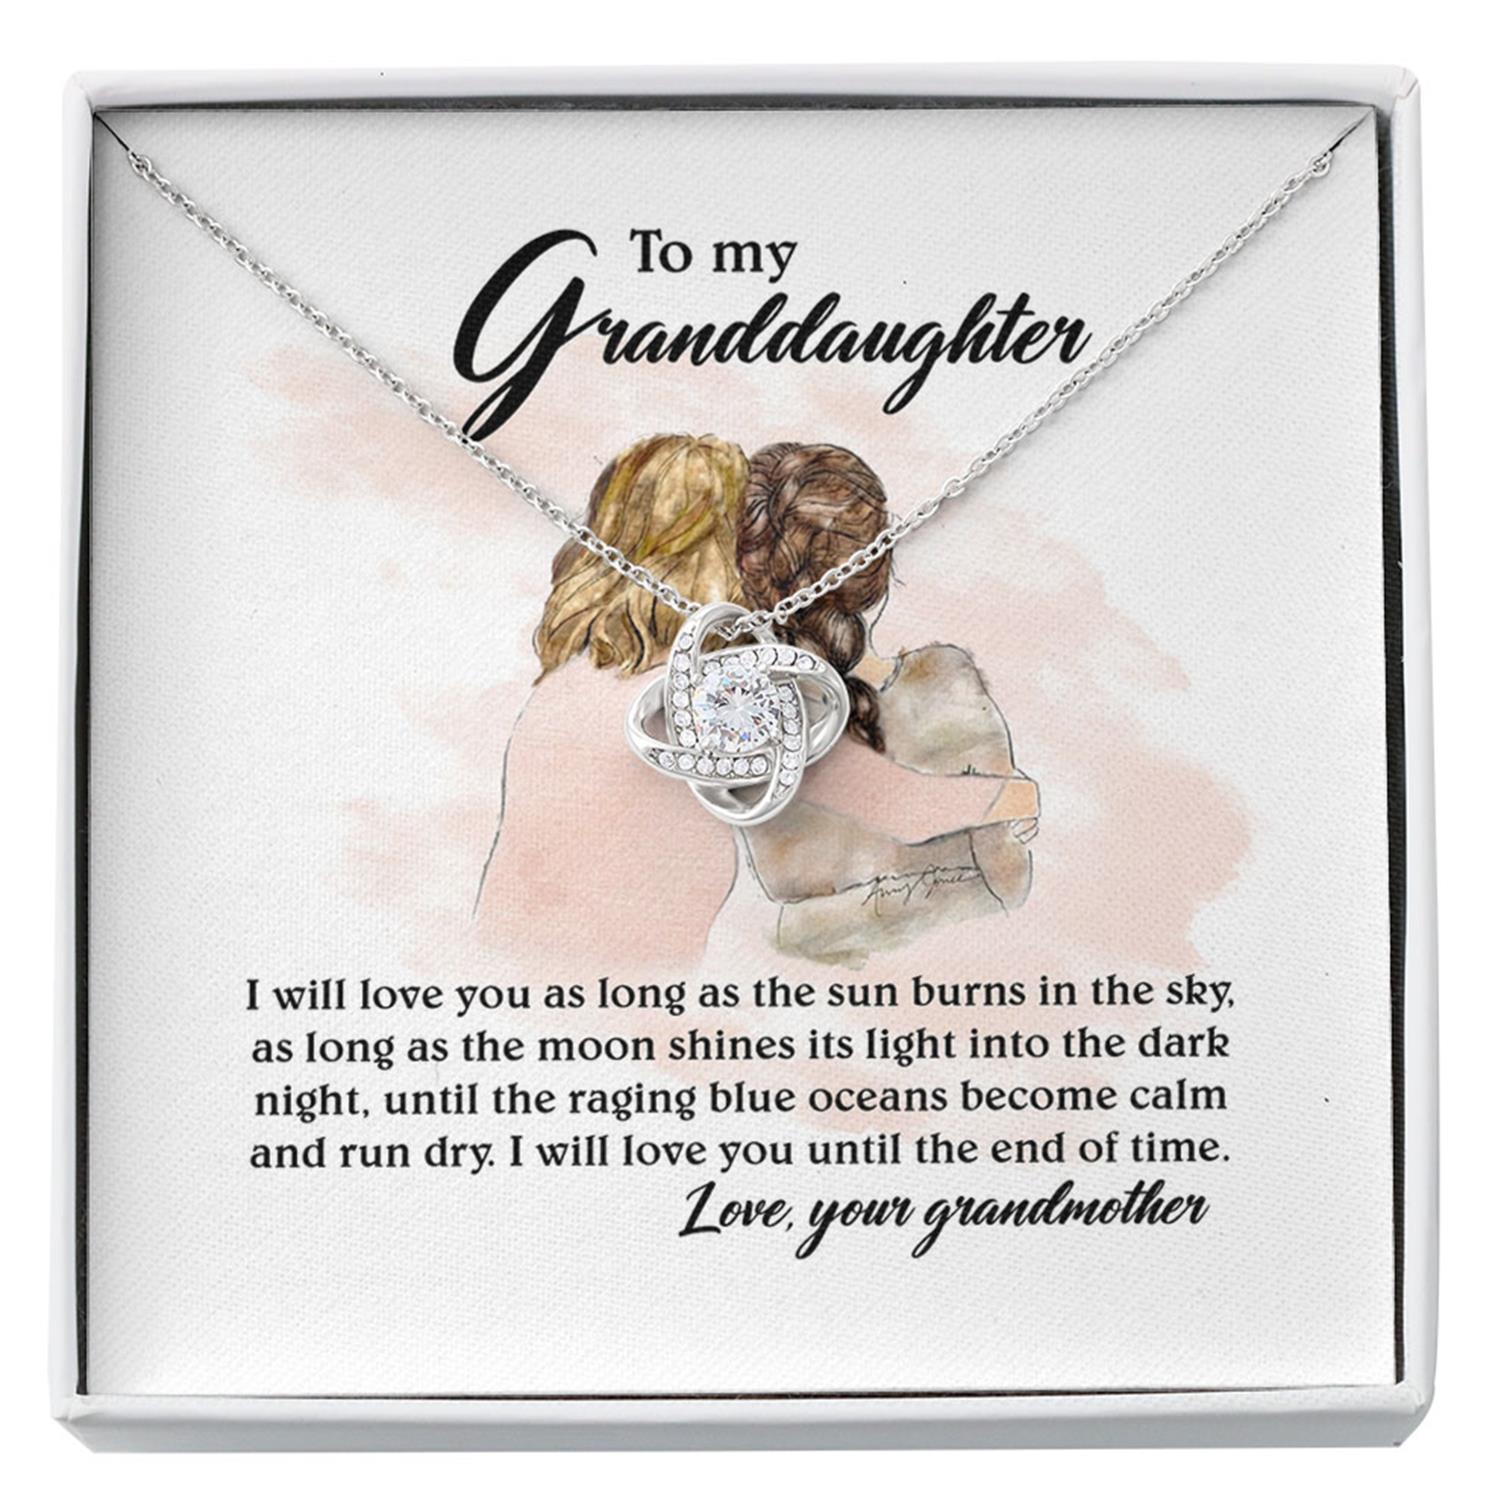 Granddaughter Necklace, To My Granddaughter Necklace Gift - Sun Burns In The Sky - Custom Necklace